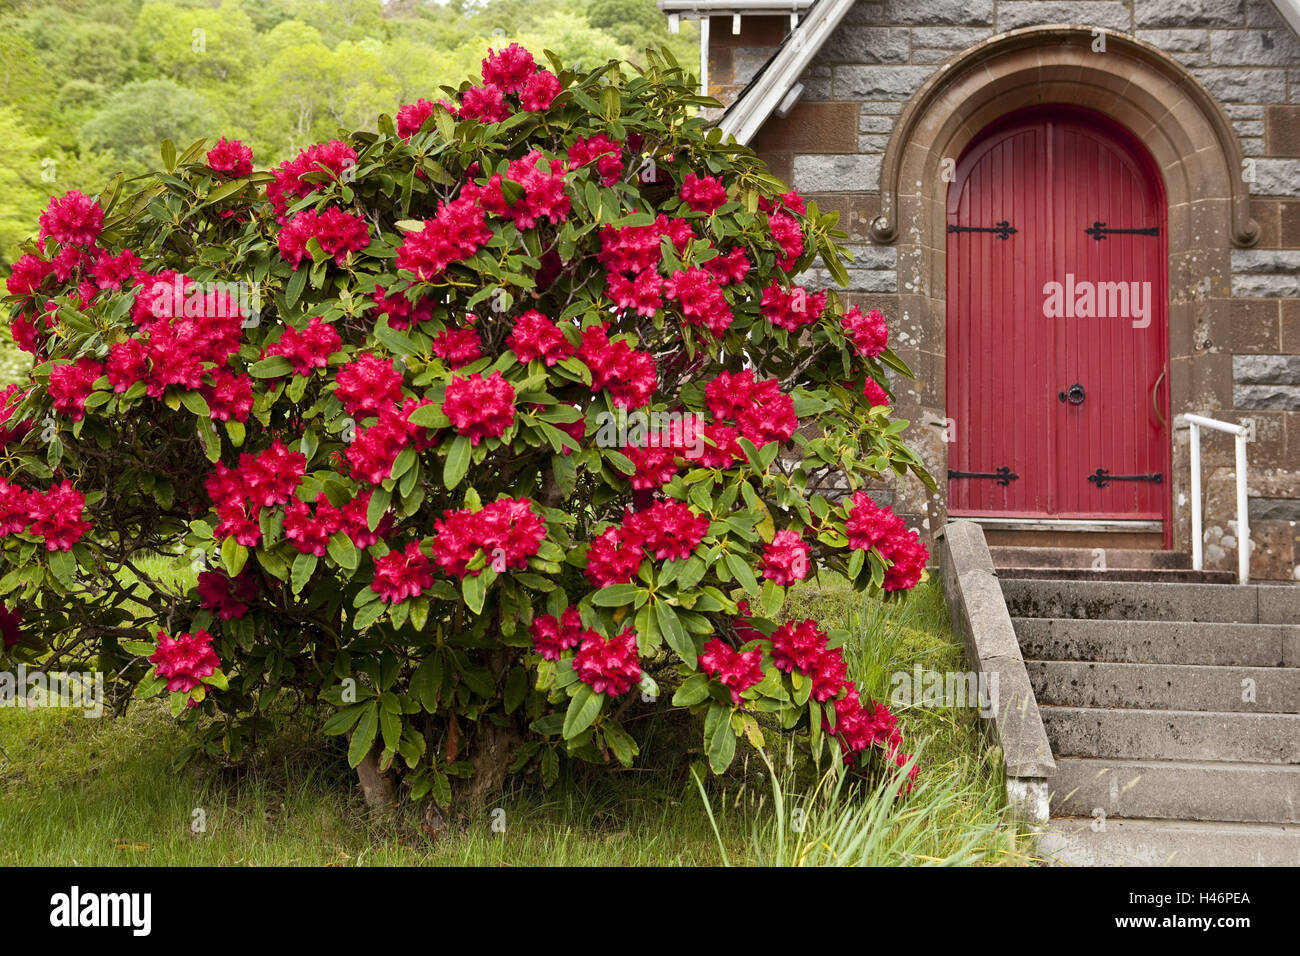 Argyll and Bute, Loch Linneh, place Onich, Nether Lochaber Parish Church, front door, red rhododendron, Stock Photo